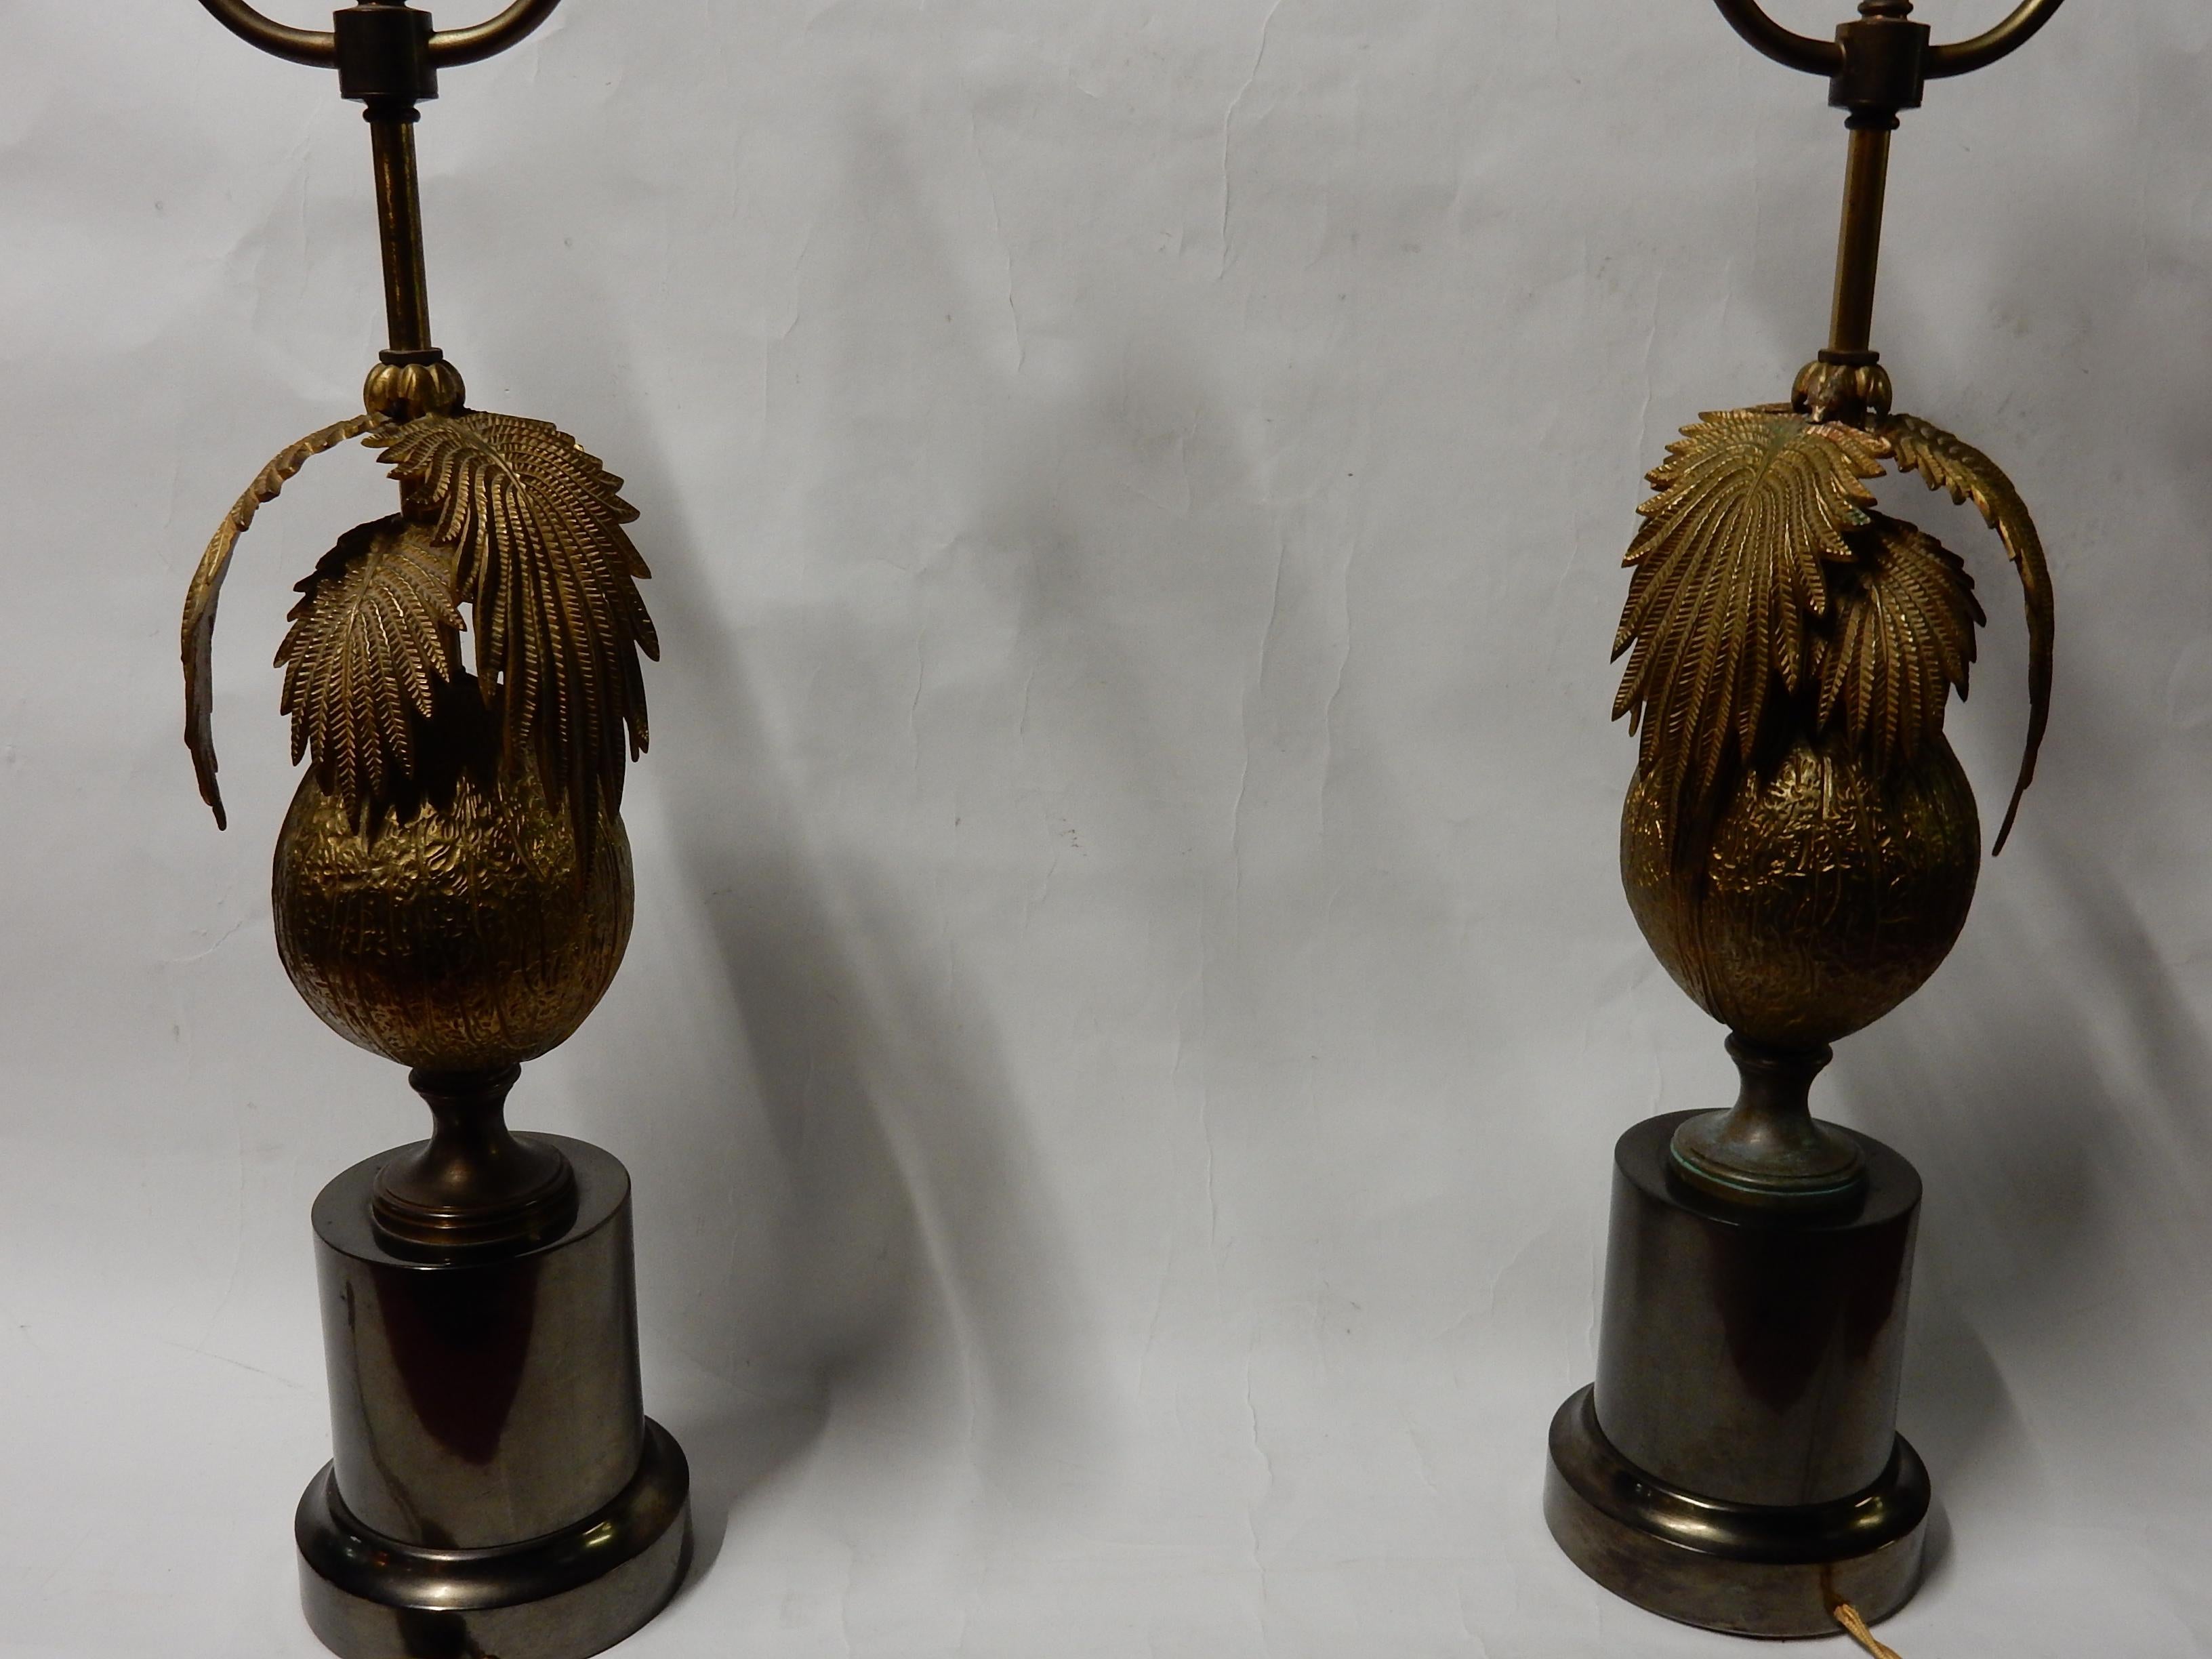 Neoclassical 1970 Pair of Lamps Palm or Coconut Tree with Coconut Style Jansen or Charles For Sale